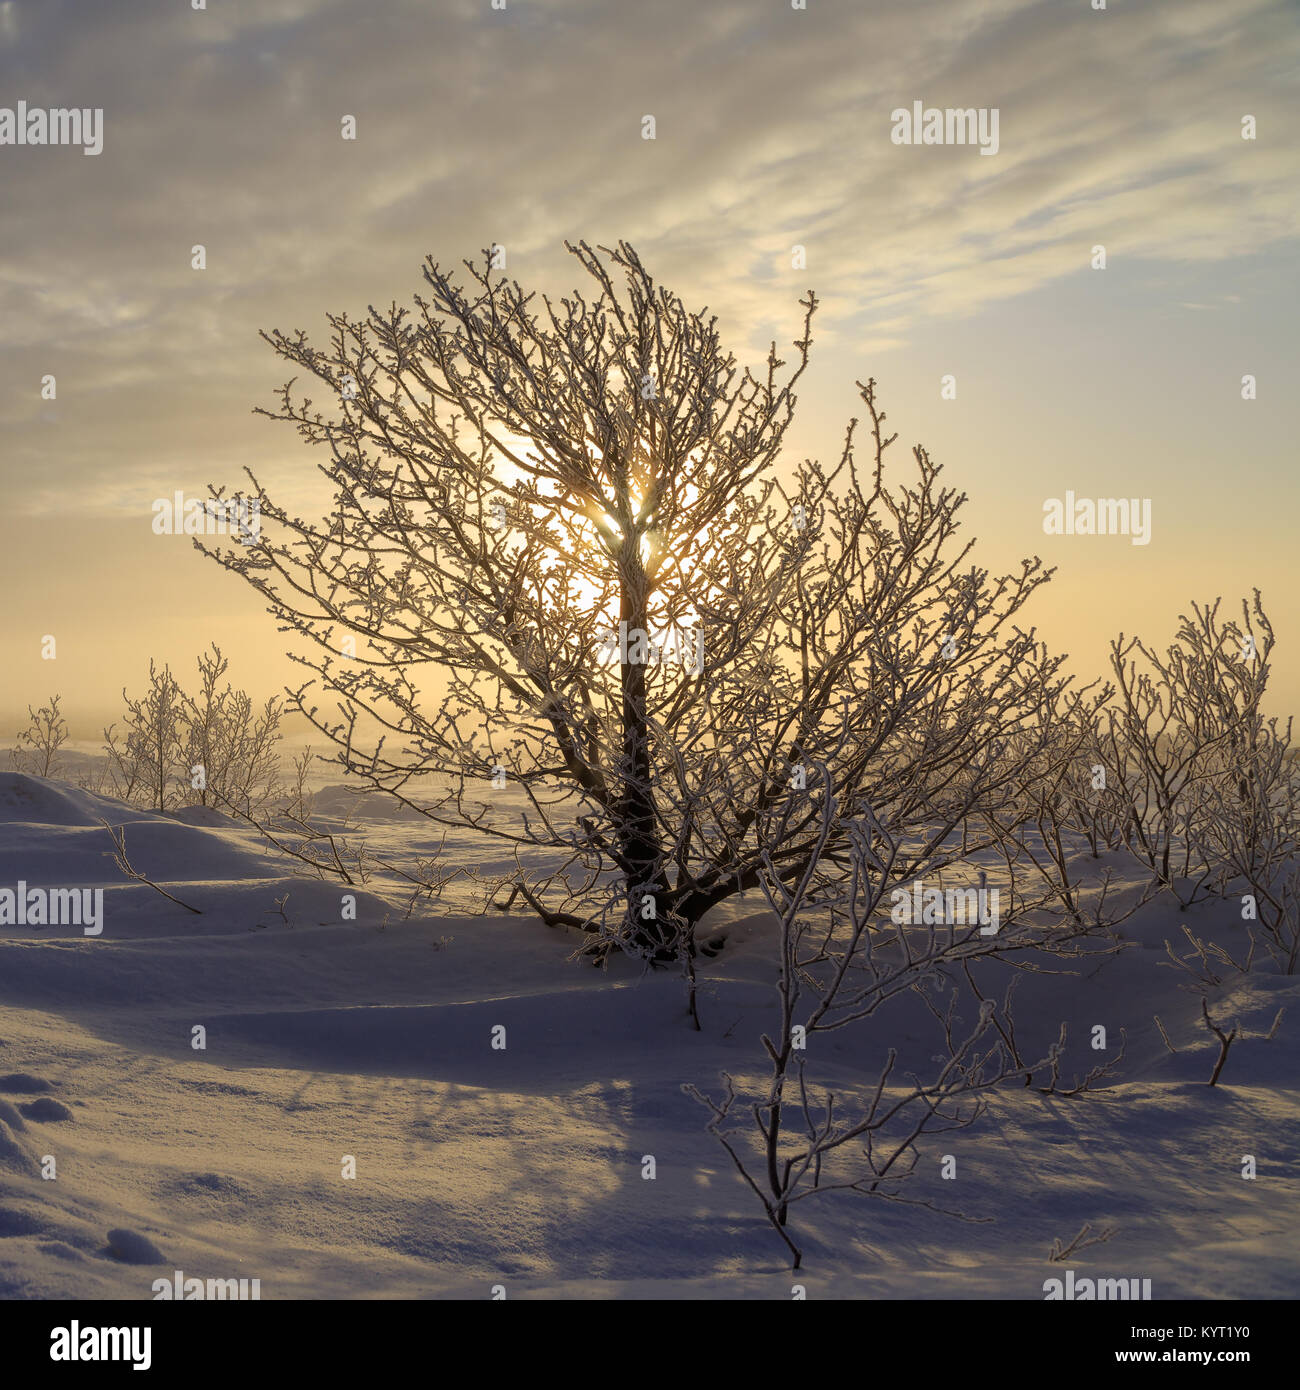 Sunshine through a small tree in the witer landscape. Stock Photo